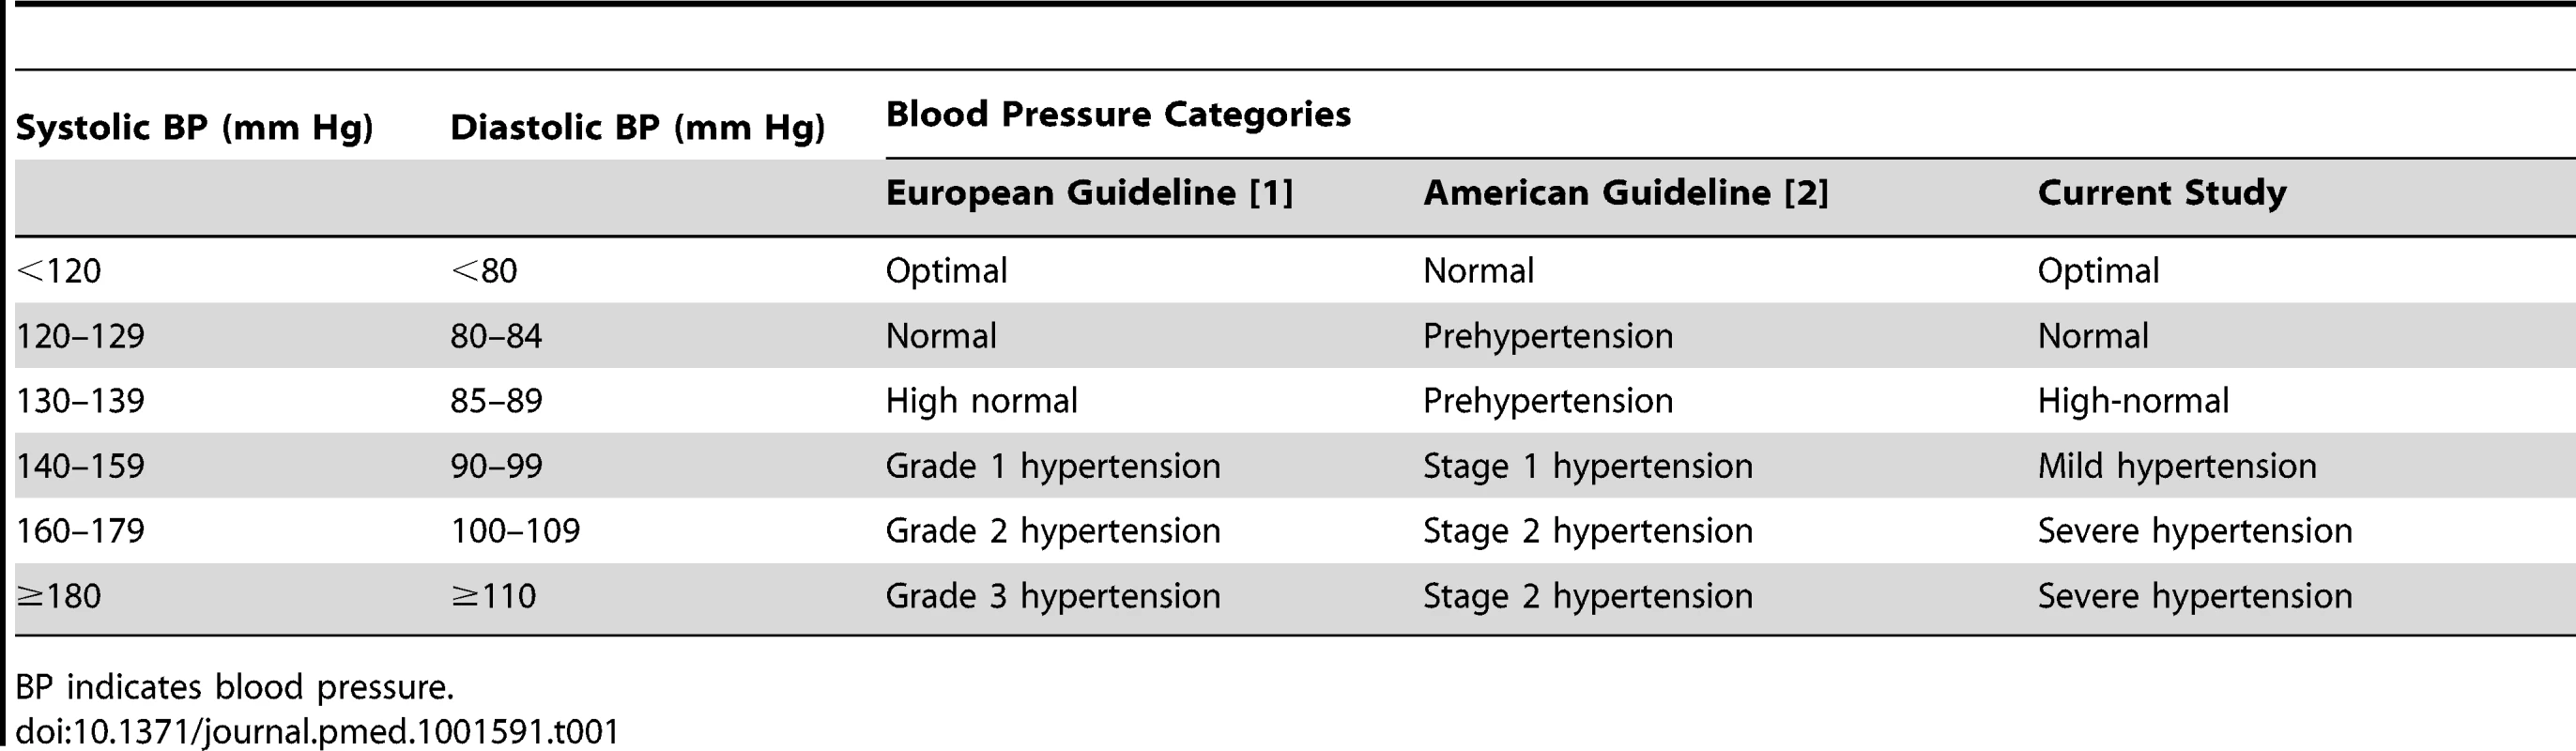 Classification of conventional blood pressure according to European and American guidelines and the current study.